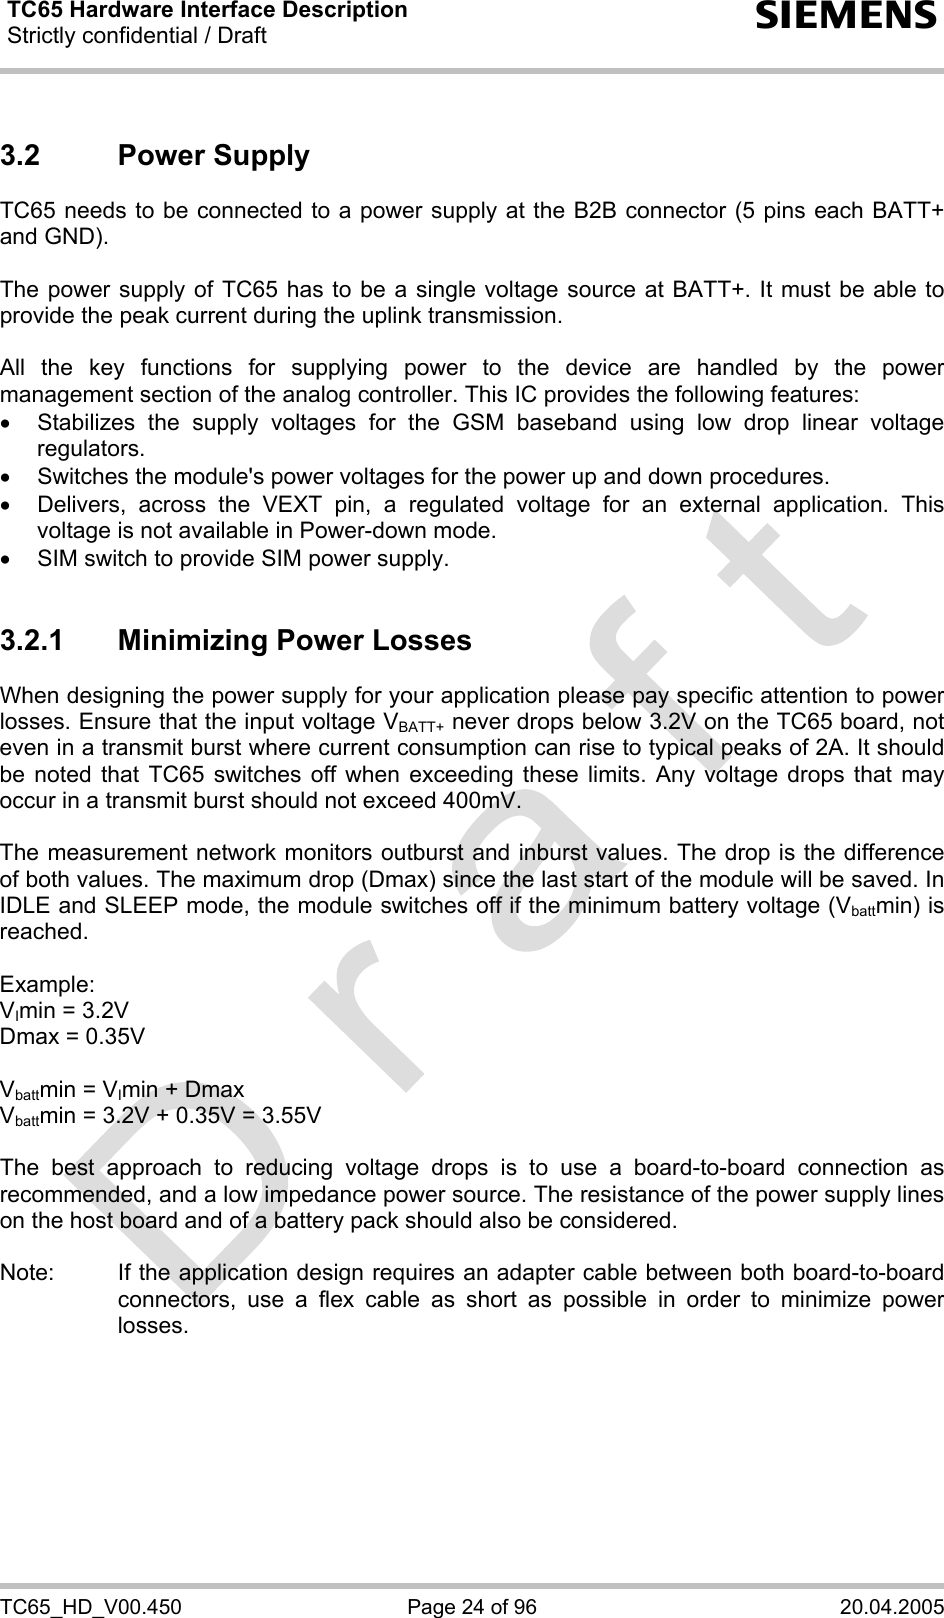 TC65 Hardware Interface Description Strictly confidential / Draft  s TC65_HD_V00.450  Page 24 of 96  20.04.2005 3.2 Power Supply TC65 needs to be connected to a power supply at the B2B connector (5 pins each BATT+ and GND).   The power supply of TC65 has to be a single voltage source at BATT+. It must be able to provide the peak current during the uplink transmission.   All the key functions for supplying power to the device are handled by the power management section of the analog controller. This IC provides the following features: • Stabilizes the supply voltages for the GSM baseband using low drop linear voltage regulators. •  Switches the module&apos;s power voltages for the power up and down procedures. •  Delivers, across the VEXT pin, a regulated voltage for an external application. This voltage is not available in Power-down mode. •  SIM switch to provide SIM power supply.  3.2.1  Minimizing Power Losses When designing the power supply for your application please pay specific attention to power losses. Ensure that the input voltage VBATT+ never drops below 3.2V on the TC65 board, not even in a transmit burst where current consumption can rise to typical peaks of 2A. It should be noted that TC65 switches off when exceeding these limits. Any voltage drops that may occur in a transmit burst should not exceed 400mV.  The measurement network monitors outburst and inburst values. The drop is the difference of both values. The maximum drop (Dmax) since the last start of the module will be saved. In IDLE and SLEEP mode, the module switches off if the minimum battery voltage (Vbattmin) is reached.  Example:  VImin = 3.2V Dmax = 0.35V  Vbattmin = VImin + Dmax Vbattmin = 3.2V + 0.35V = 3.55V  The best approach to reducing voltage drops is to use a board-to-board connection as recommended, and a low impedance power source. The resistance of the power supply lines on the host board and of a battery pack should also be considered.  Note:  If the application design requires an adapter cable between both board-to-board connectors, use a flex cable as short as possible in order to minimize power losses.   